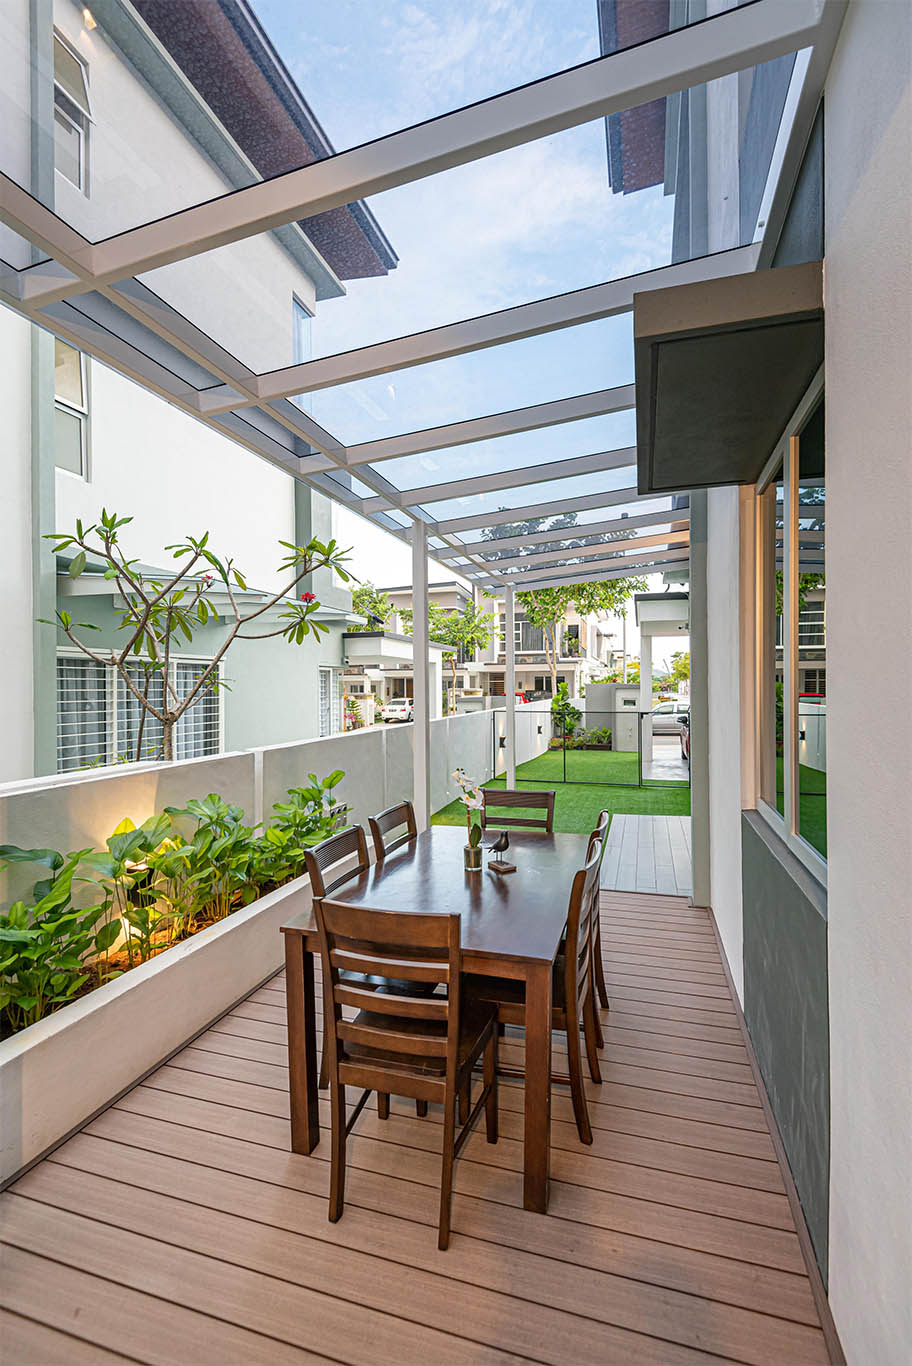 Outdoor decoration with transparent glass awning, wooden floor and table, and some green plants